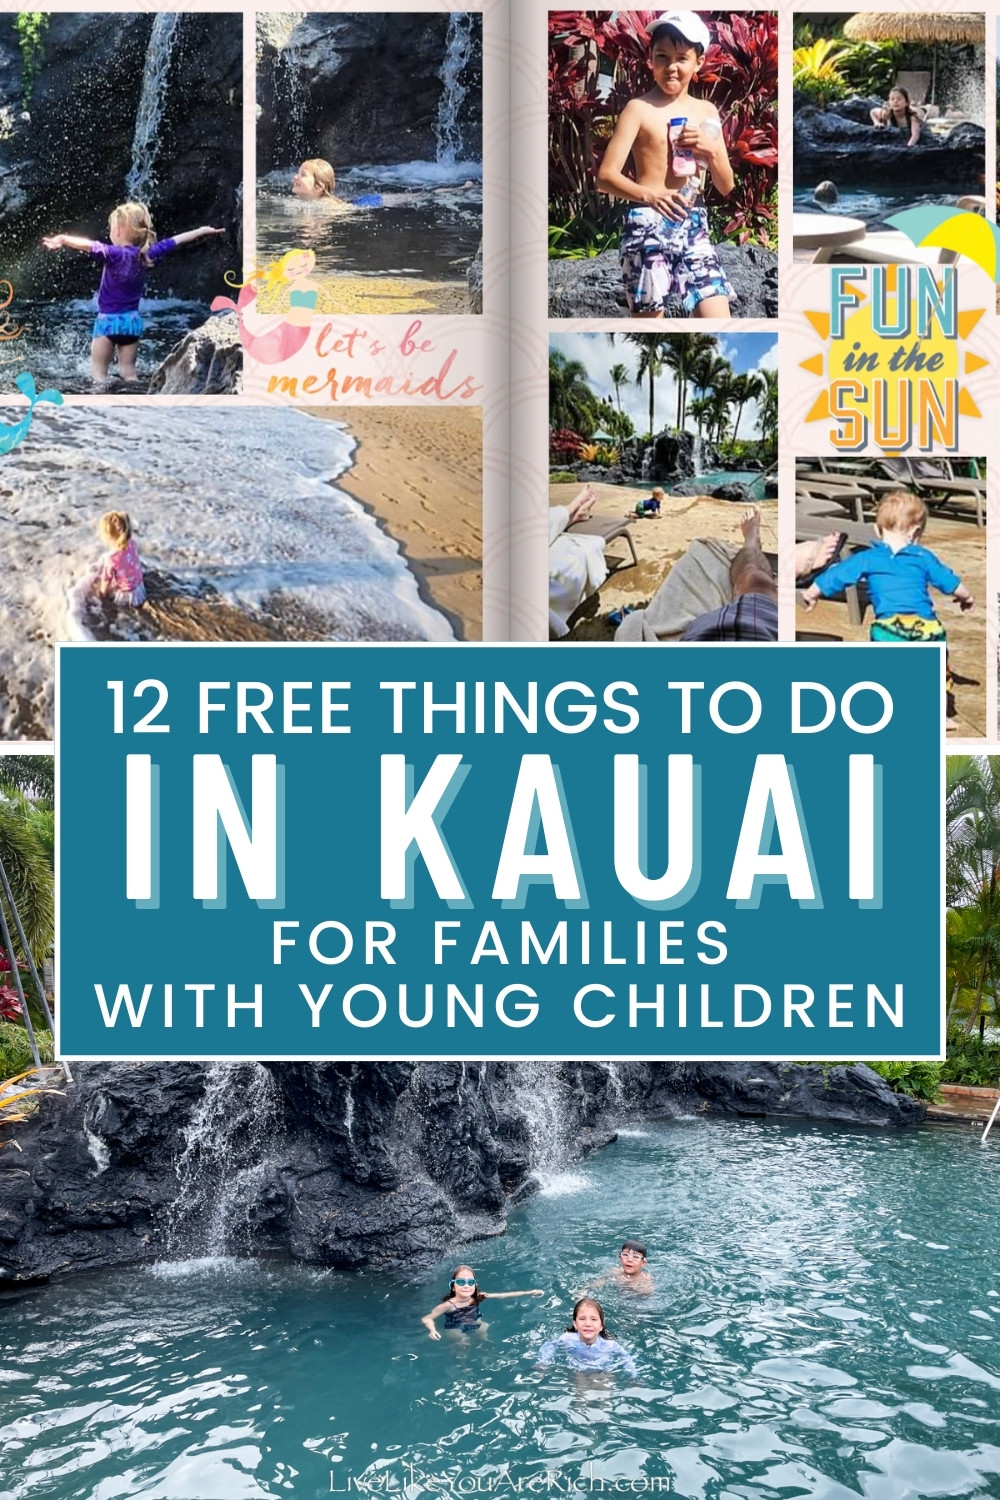 12 Free Things to Do in Kauai for Families with Young Children